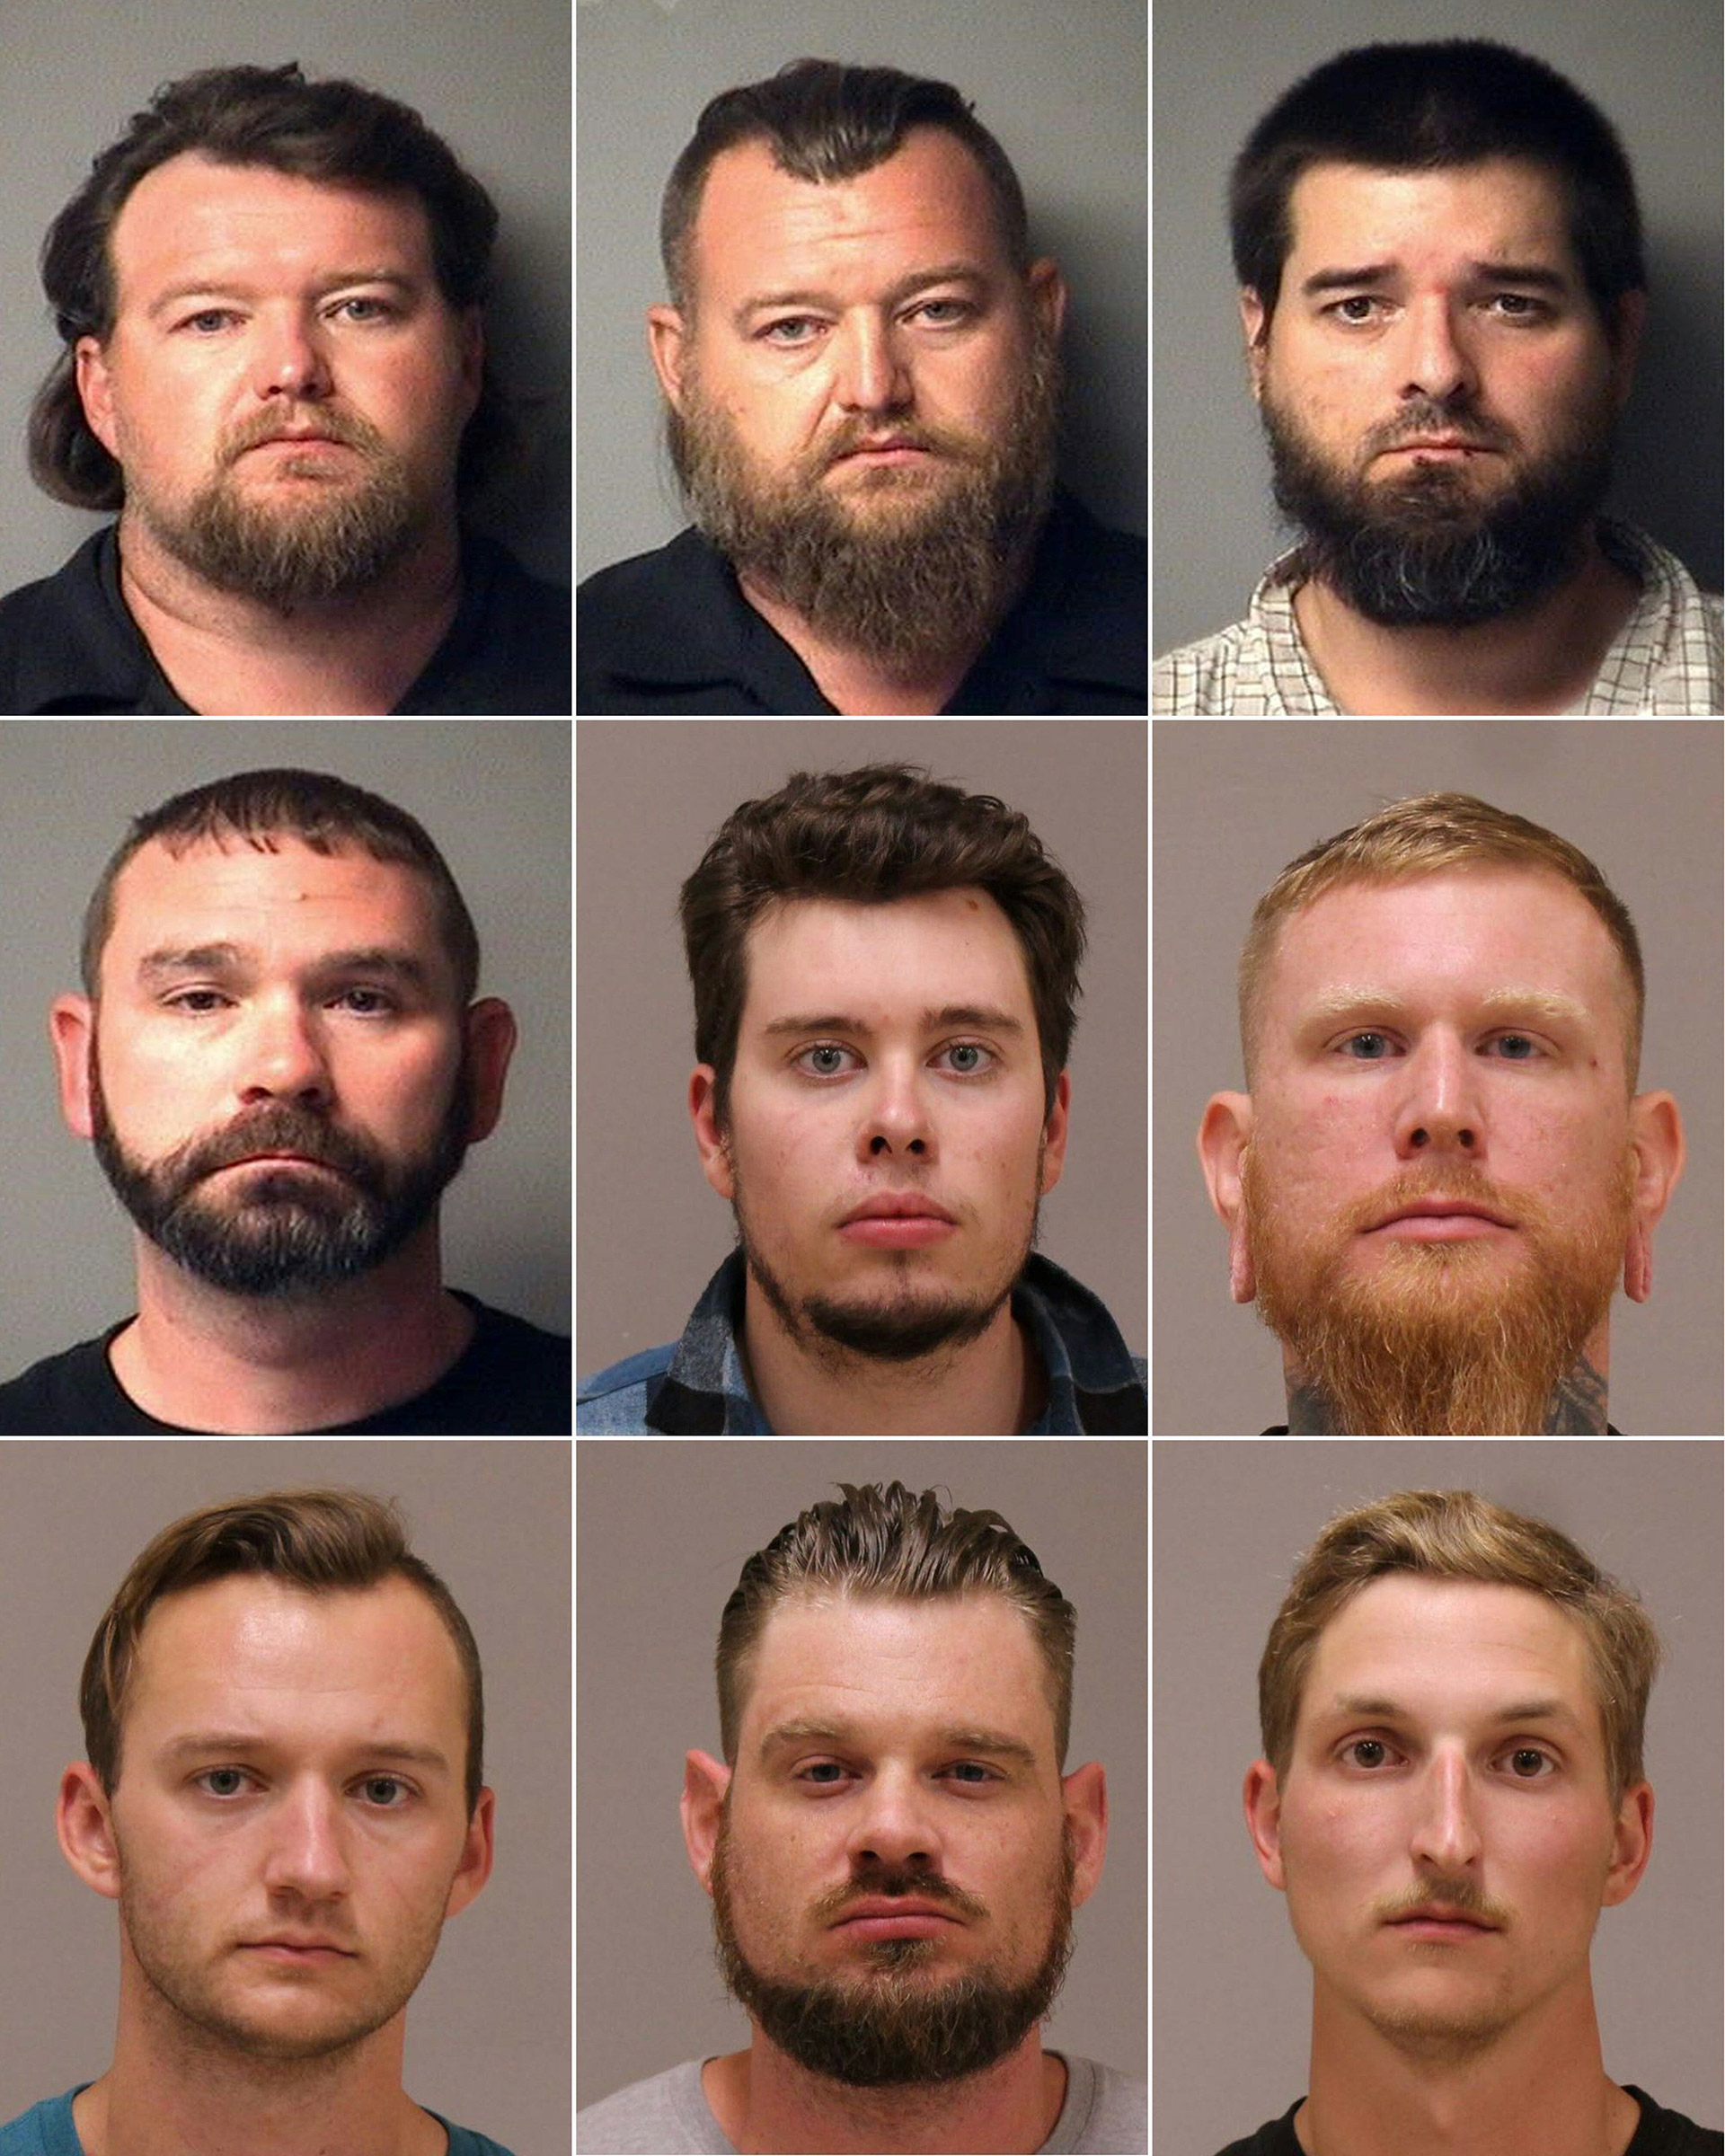 This grid of pictures shows booking photos released by the Antrim County Sheriff's Office in Michigan (L-R, top to bottom) Michael Null, William Null, Eric Molitor, and Shawn Fix and images released by the Kent County Sheriff's Office in Michigan, Ty Garbin, Brandon Caserta, Kaleb Franks, Adam Fox, and Daniel Harris. All are suspects have been arrested for plotting to kidnap Michigan Governor Gretchen Whitmer and "instigate a civil war", Michigan Attorney General Dana Nessel announced on October 8, 2020. (Kent County Sheriff's Office/AFP)